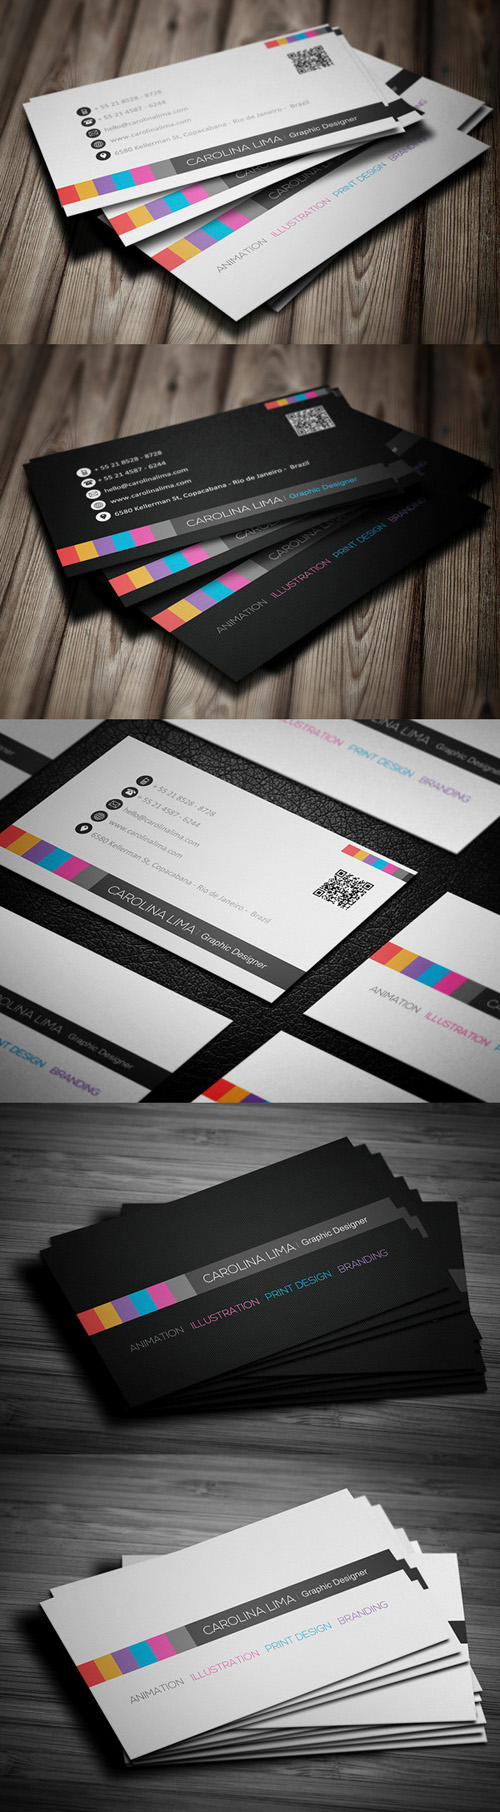 Cost-effective Business Cards Design - 12